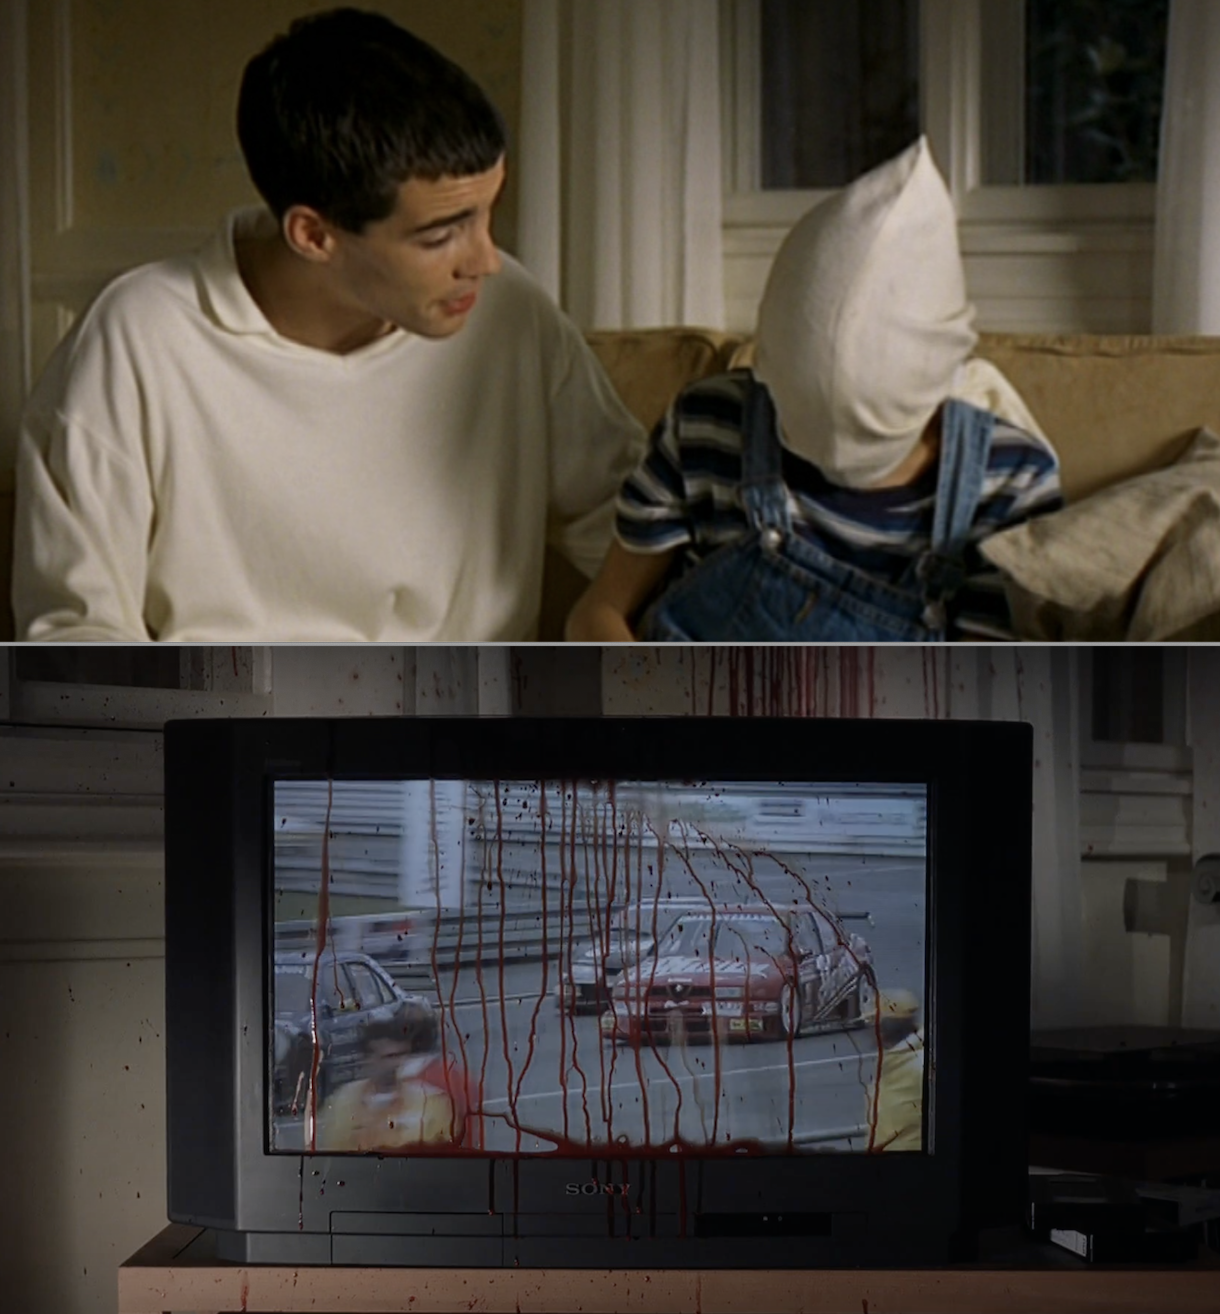 A man taking a kid hostage, then a TV screen with blood on it